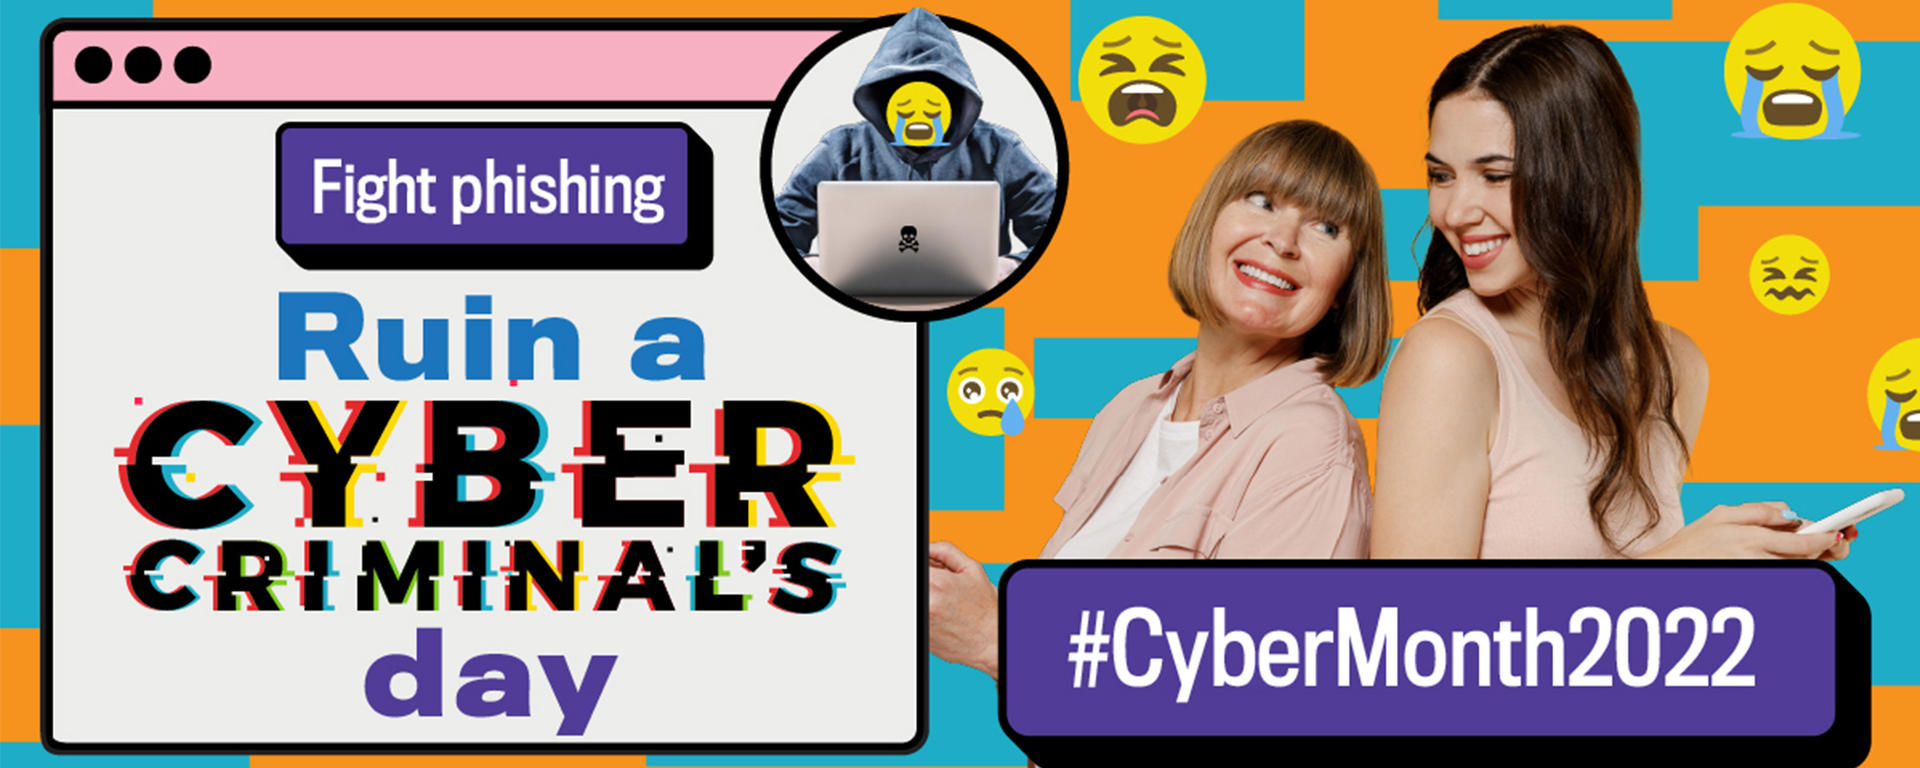 Cybersecurity month banner